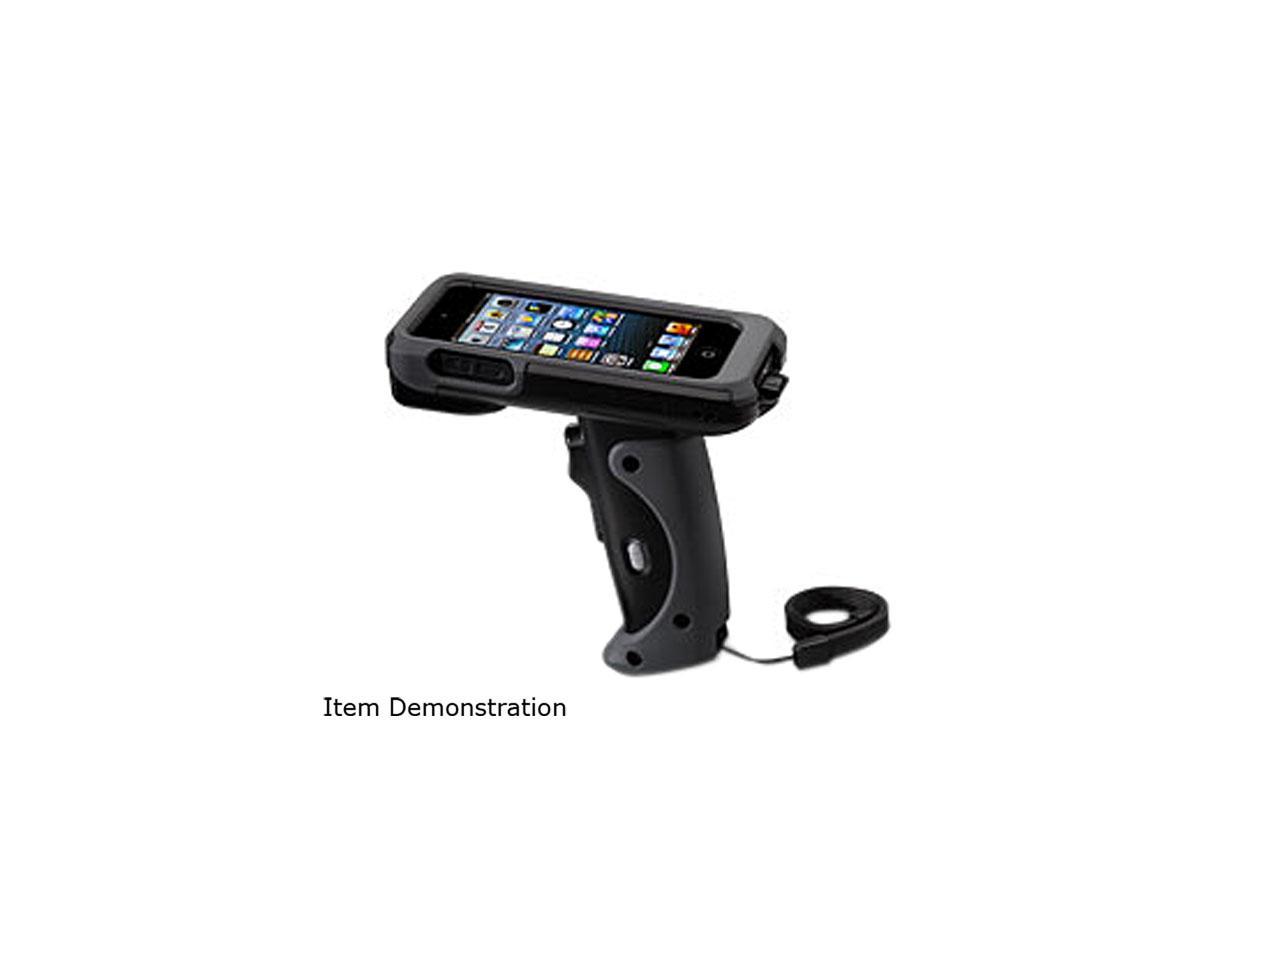 PS-LINEA-PRO-1 Infinite Peripherals Linea Pro 5 Barcode Scanner Charger